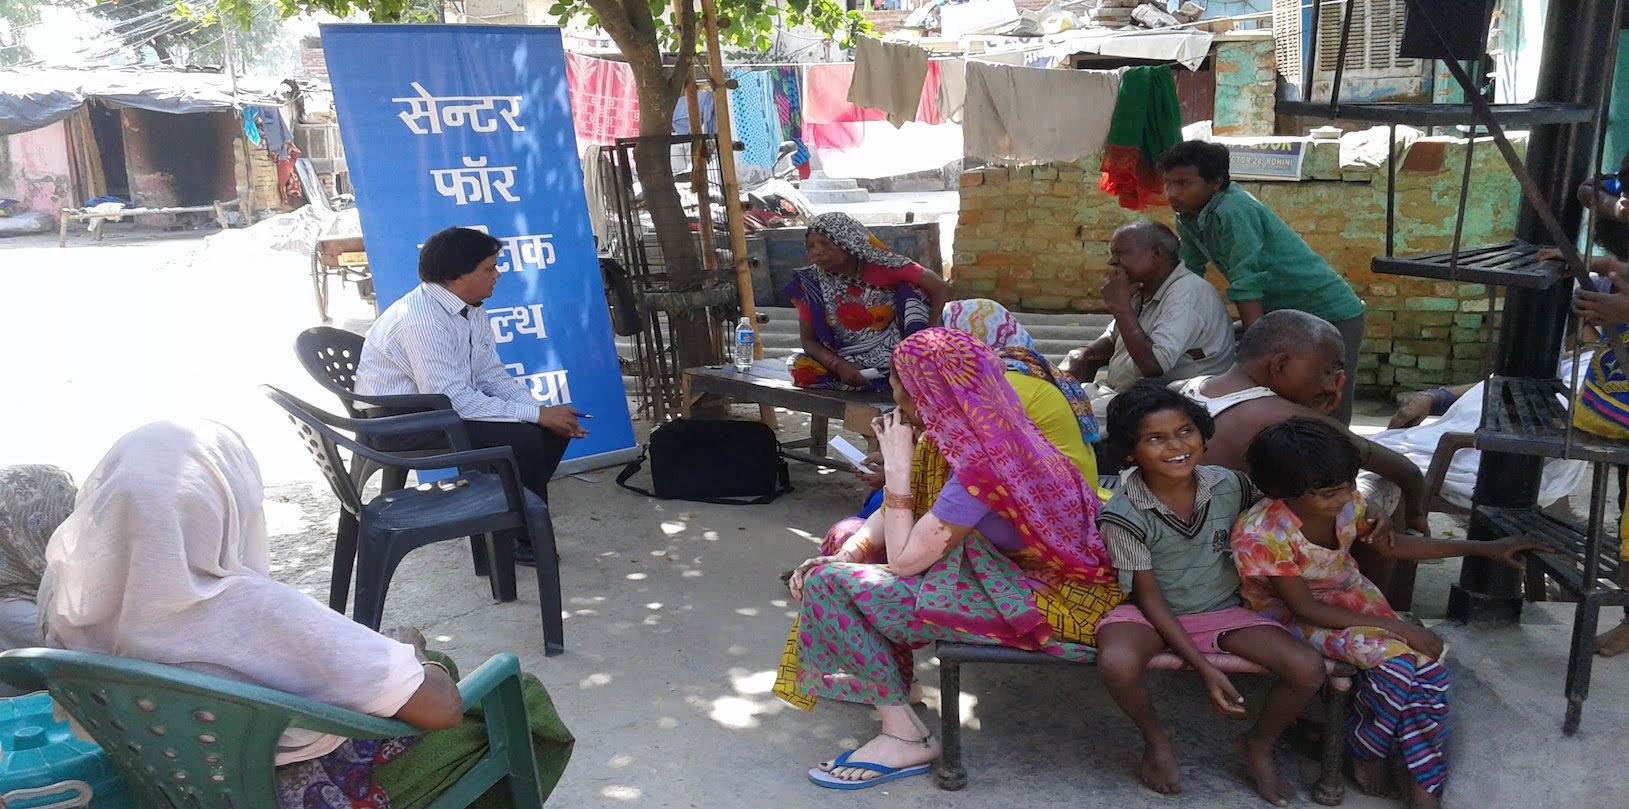 Monitoring health issues among slums in Delhi